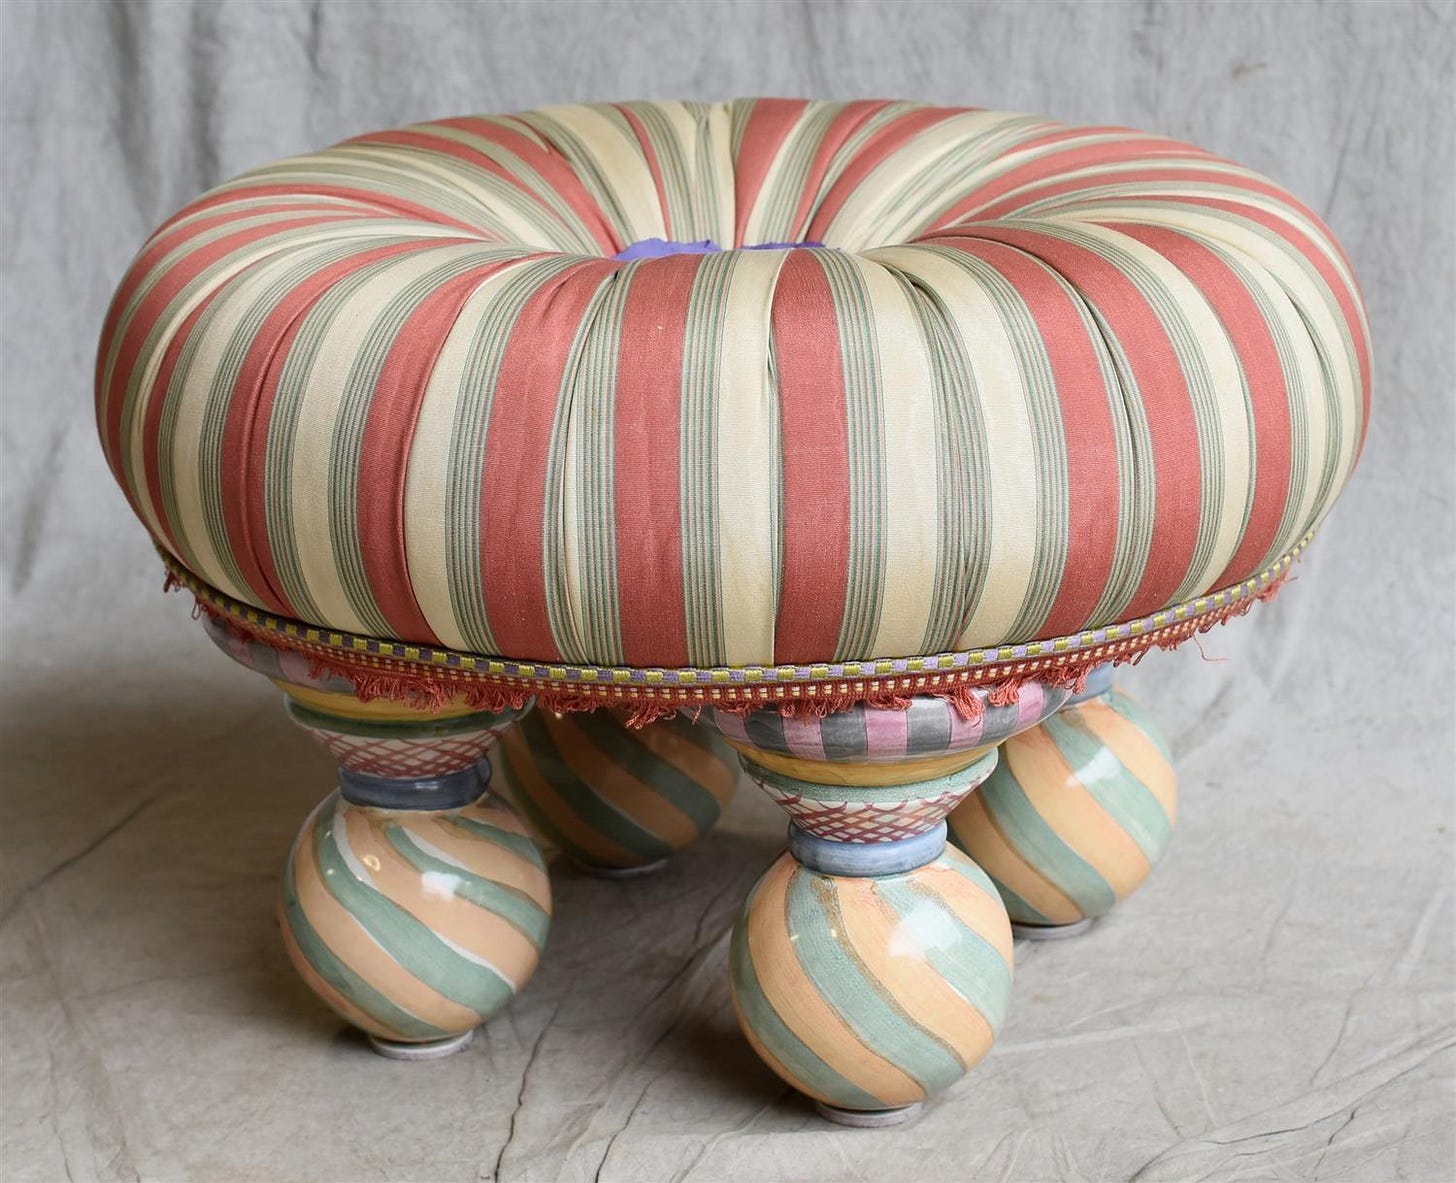 Sold Price: Mackenzie Childs striped tuffet, ceramic painted ball feet,  marked on base Victoria and Richard Mackenzie Childs, October 2, 1993, a...  - June 2, 0119 10:00 AM EDT